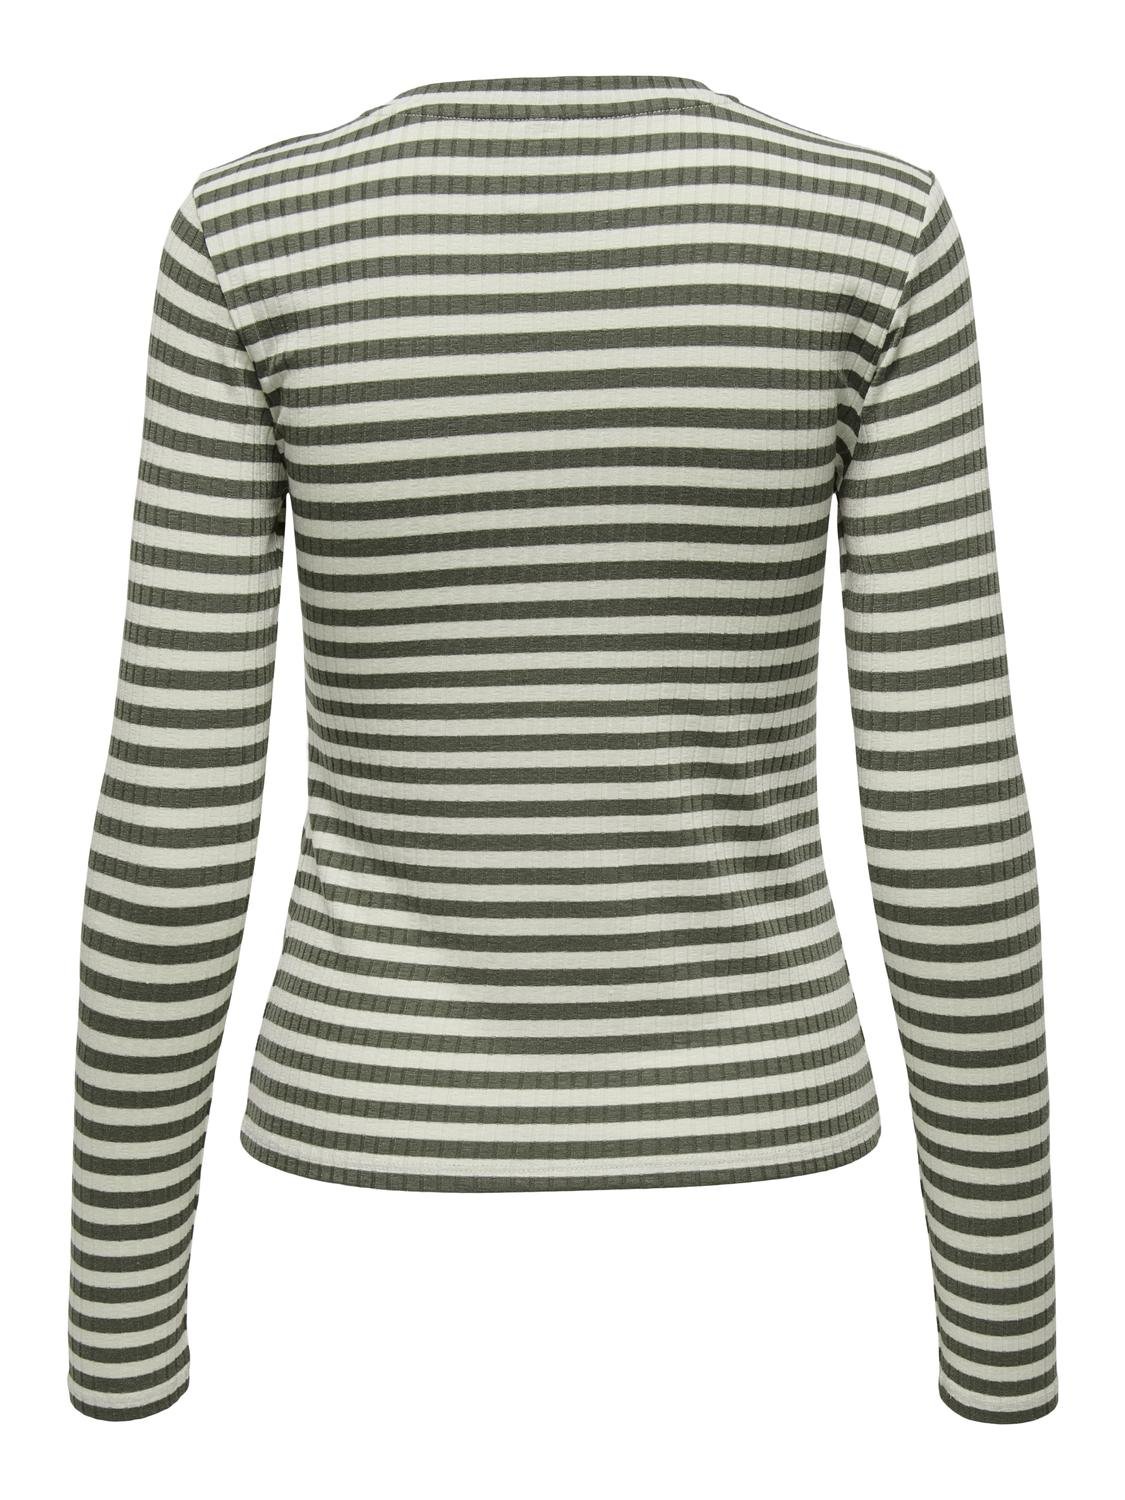 ONLY Striped Long Sleeves Top -Sea Spray - 15244118